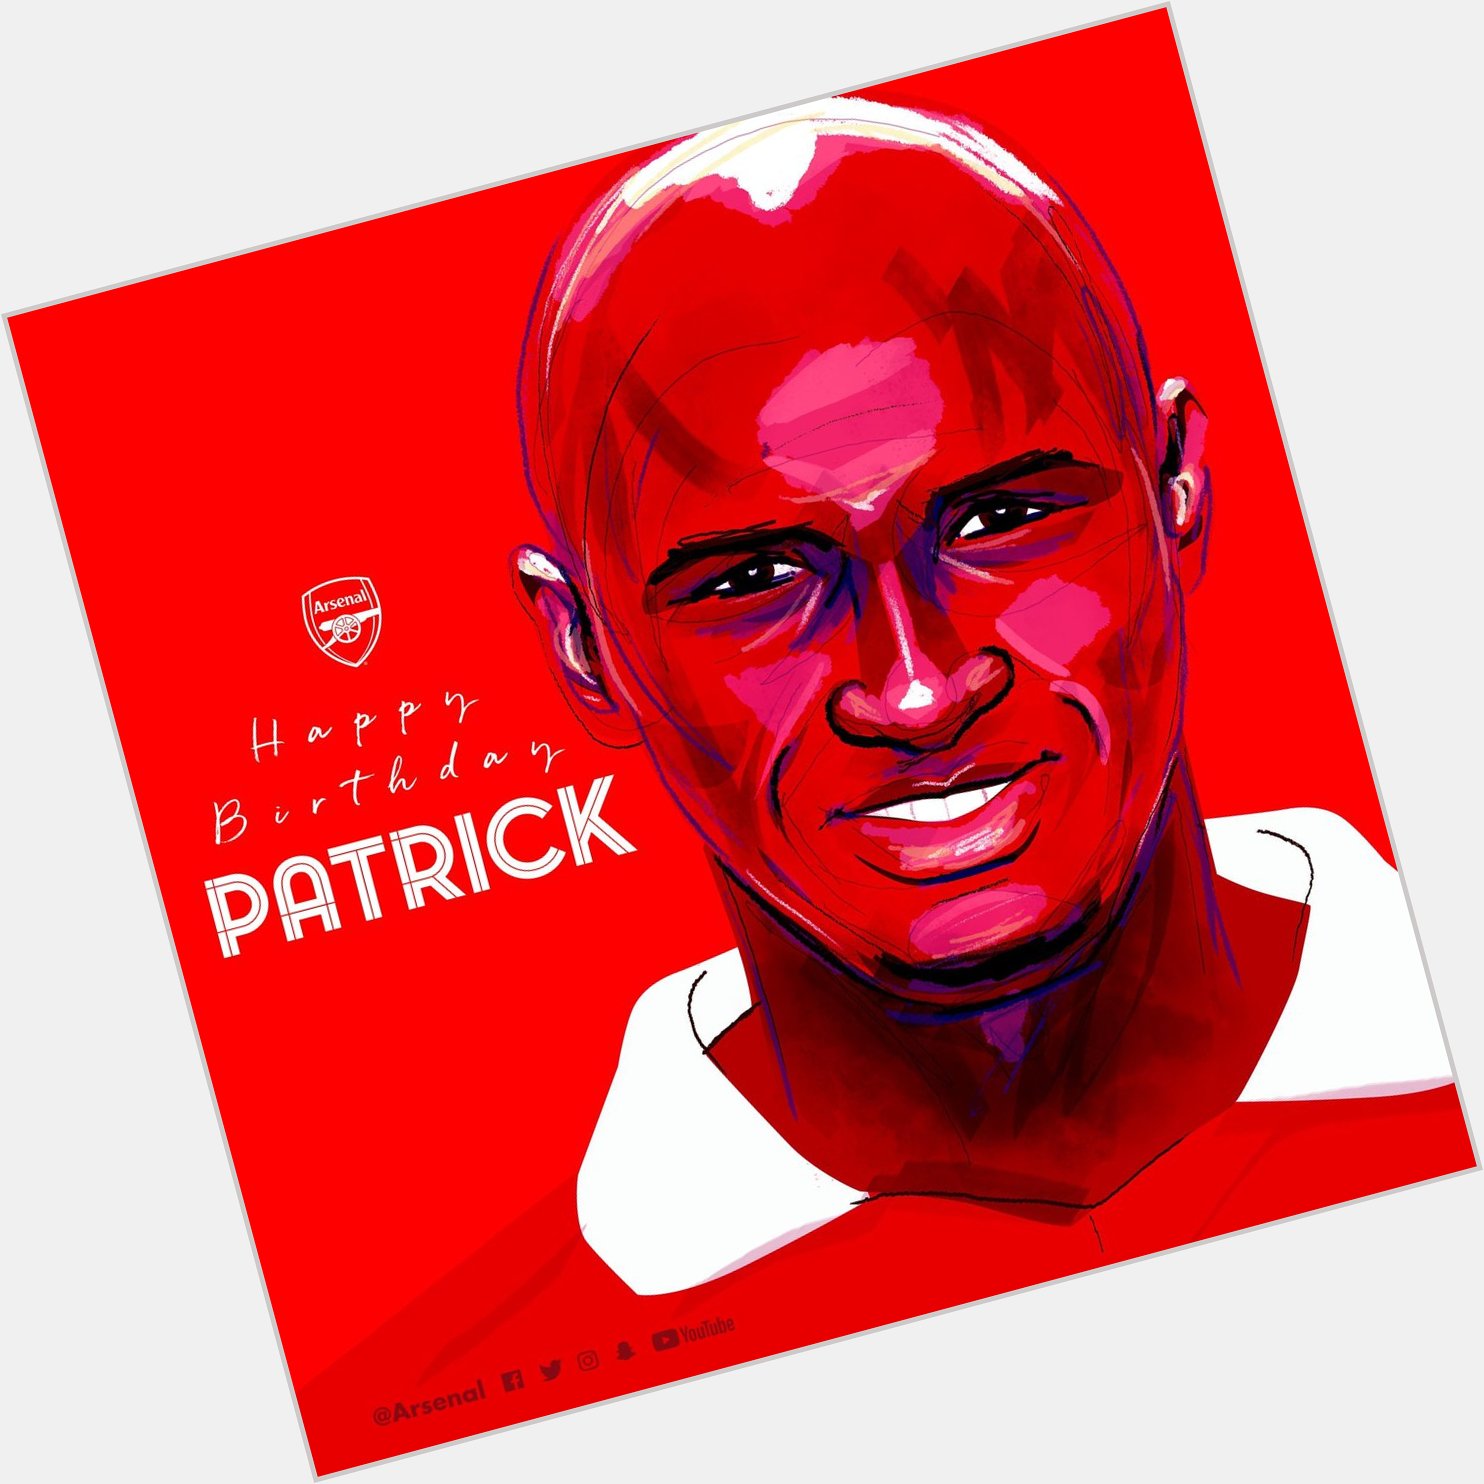 Happy birthday to one of the greatest ever players in Arsenal\s history - Patrick Vieira turns 42 today. 